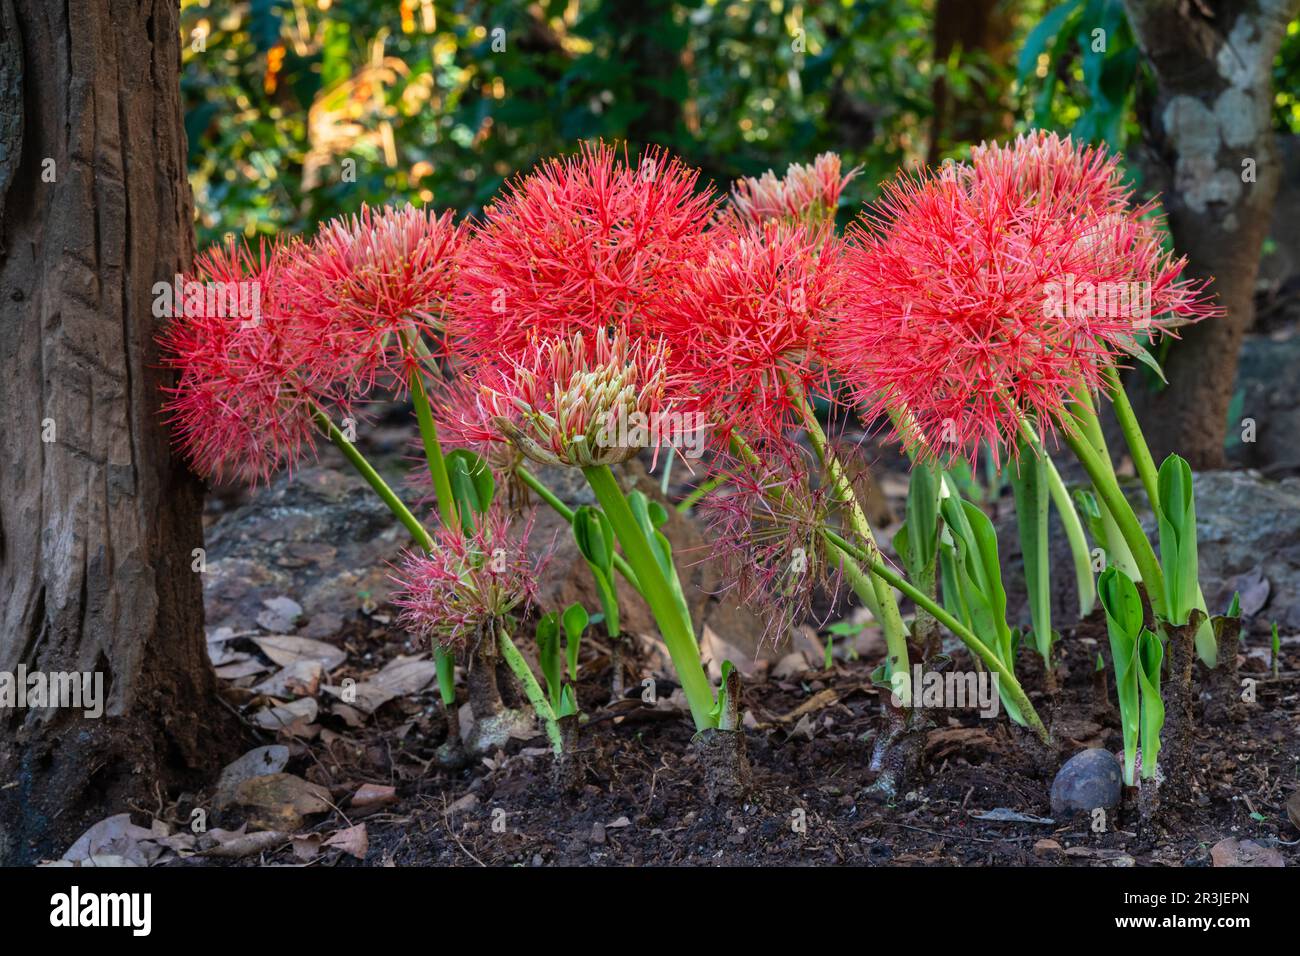 Closeup view of bright orange red flowers of scadoxus multiflorus aka blood lily blooming in tropical garden on natural background Stock Photo